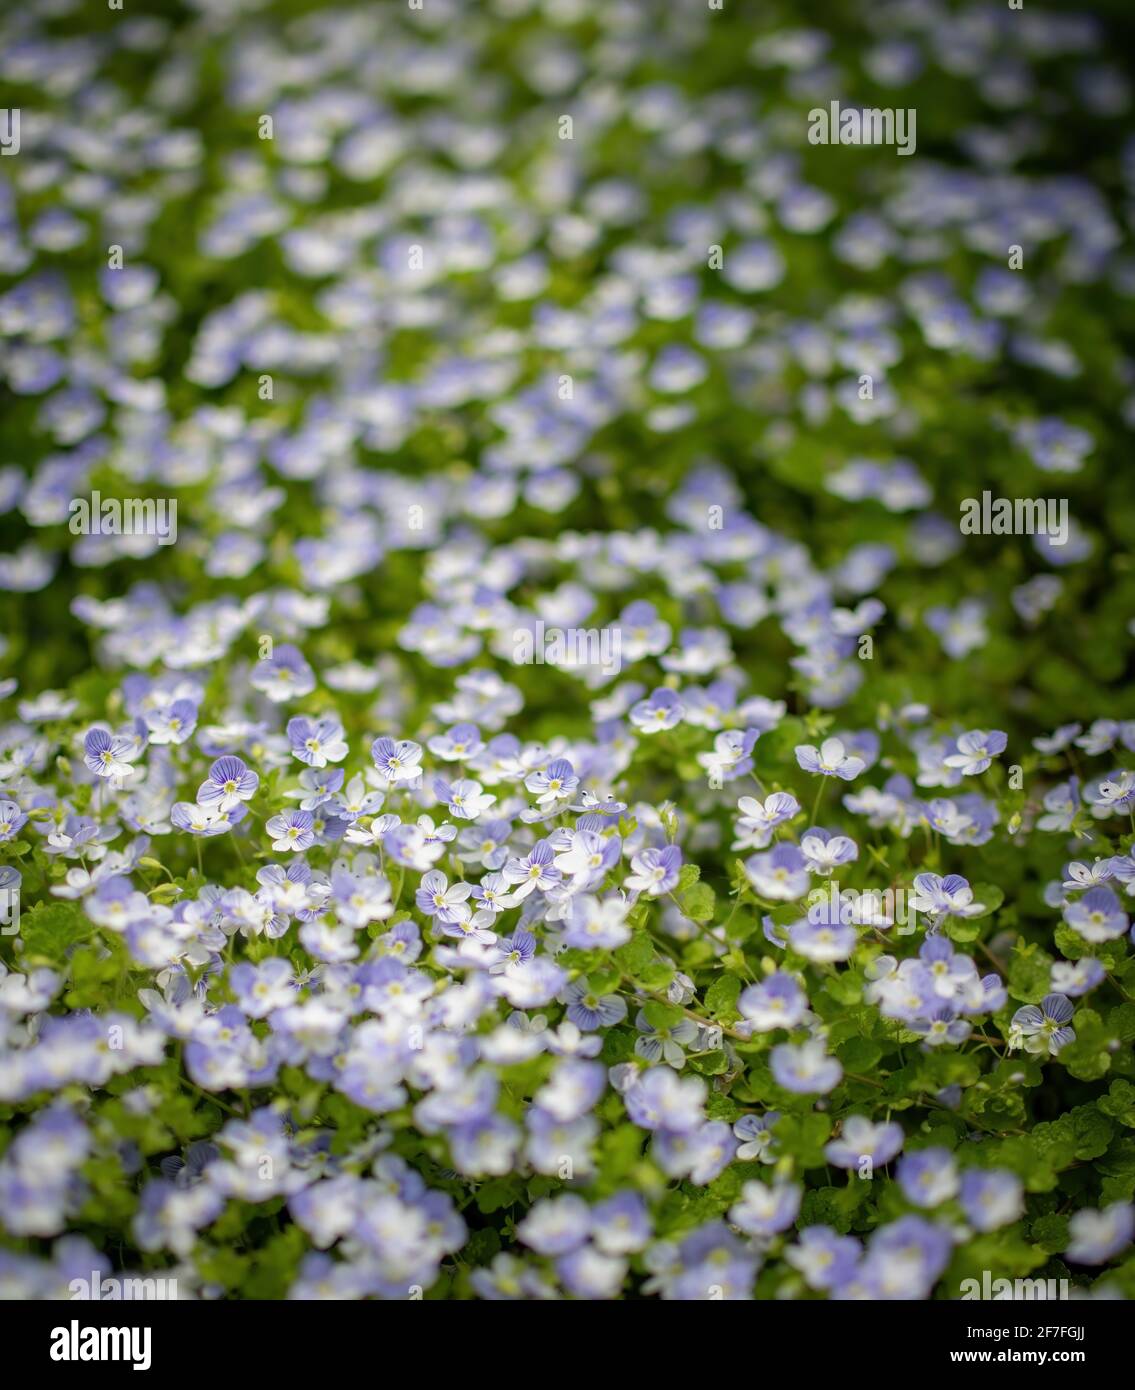 Blue flowers Veronica speedwell closeup in meadow Stock Photo